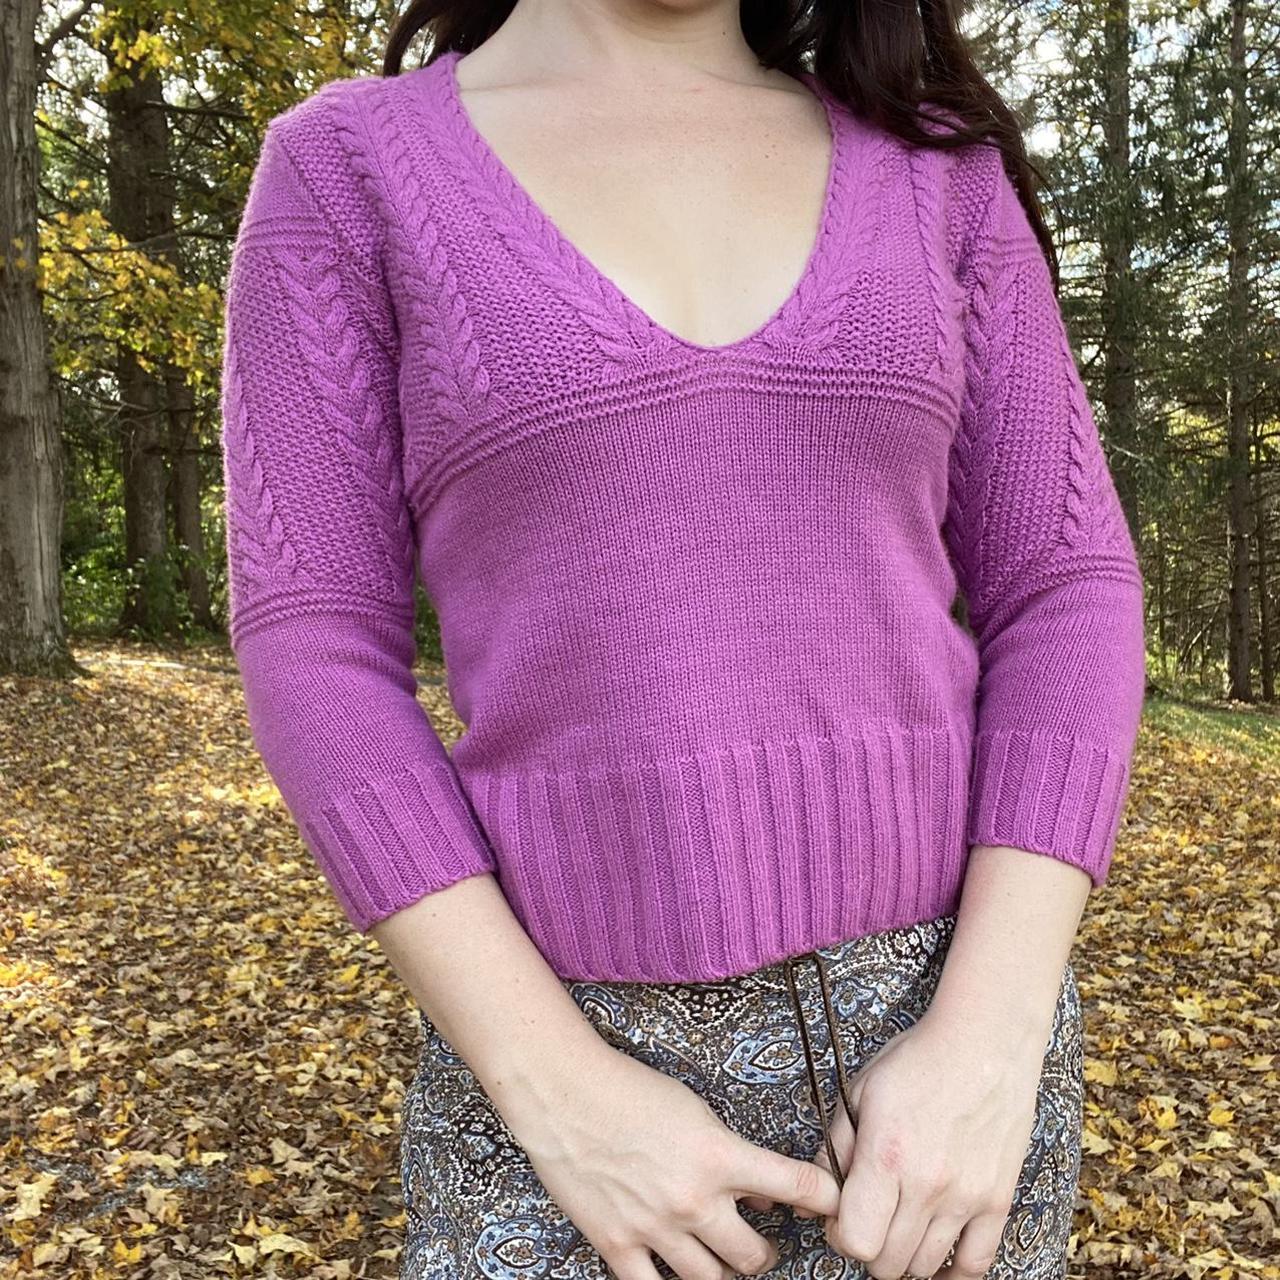 Product Image 2 - Ballerina Off-Duty Sweater

Cropped magenta knit

Size